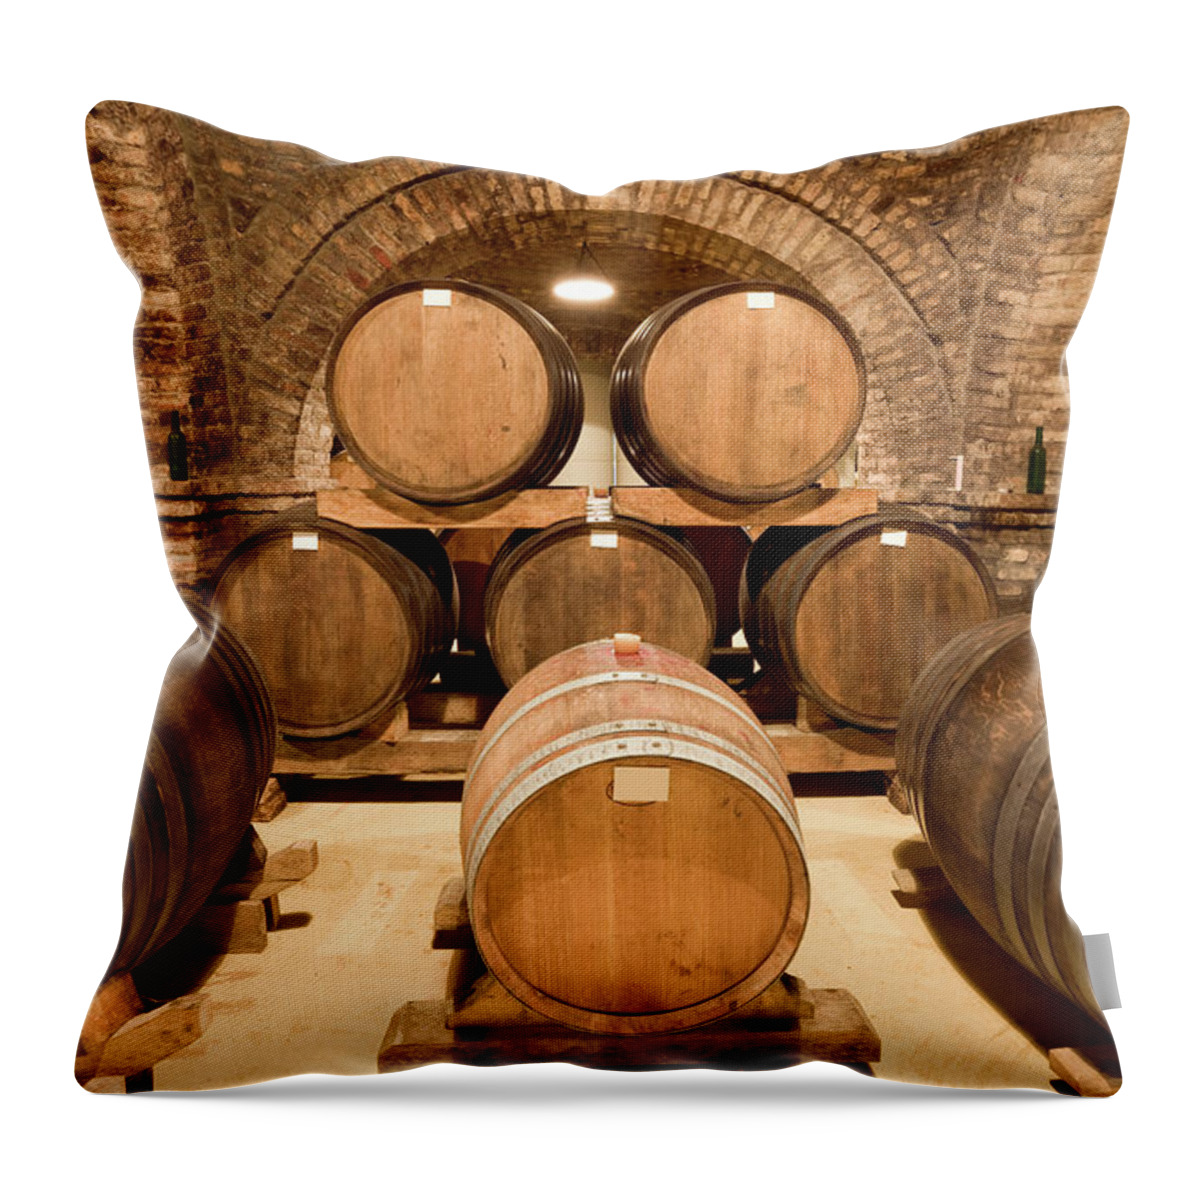 Arch Throw Pillow featuring the photograph Wooden Barrels In Wine Cellar by Benedek